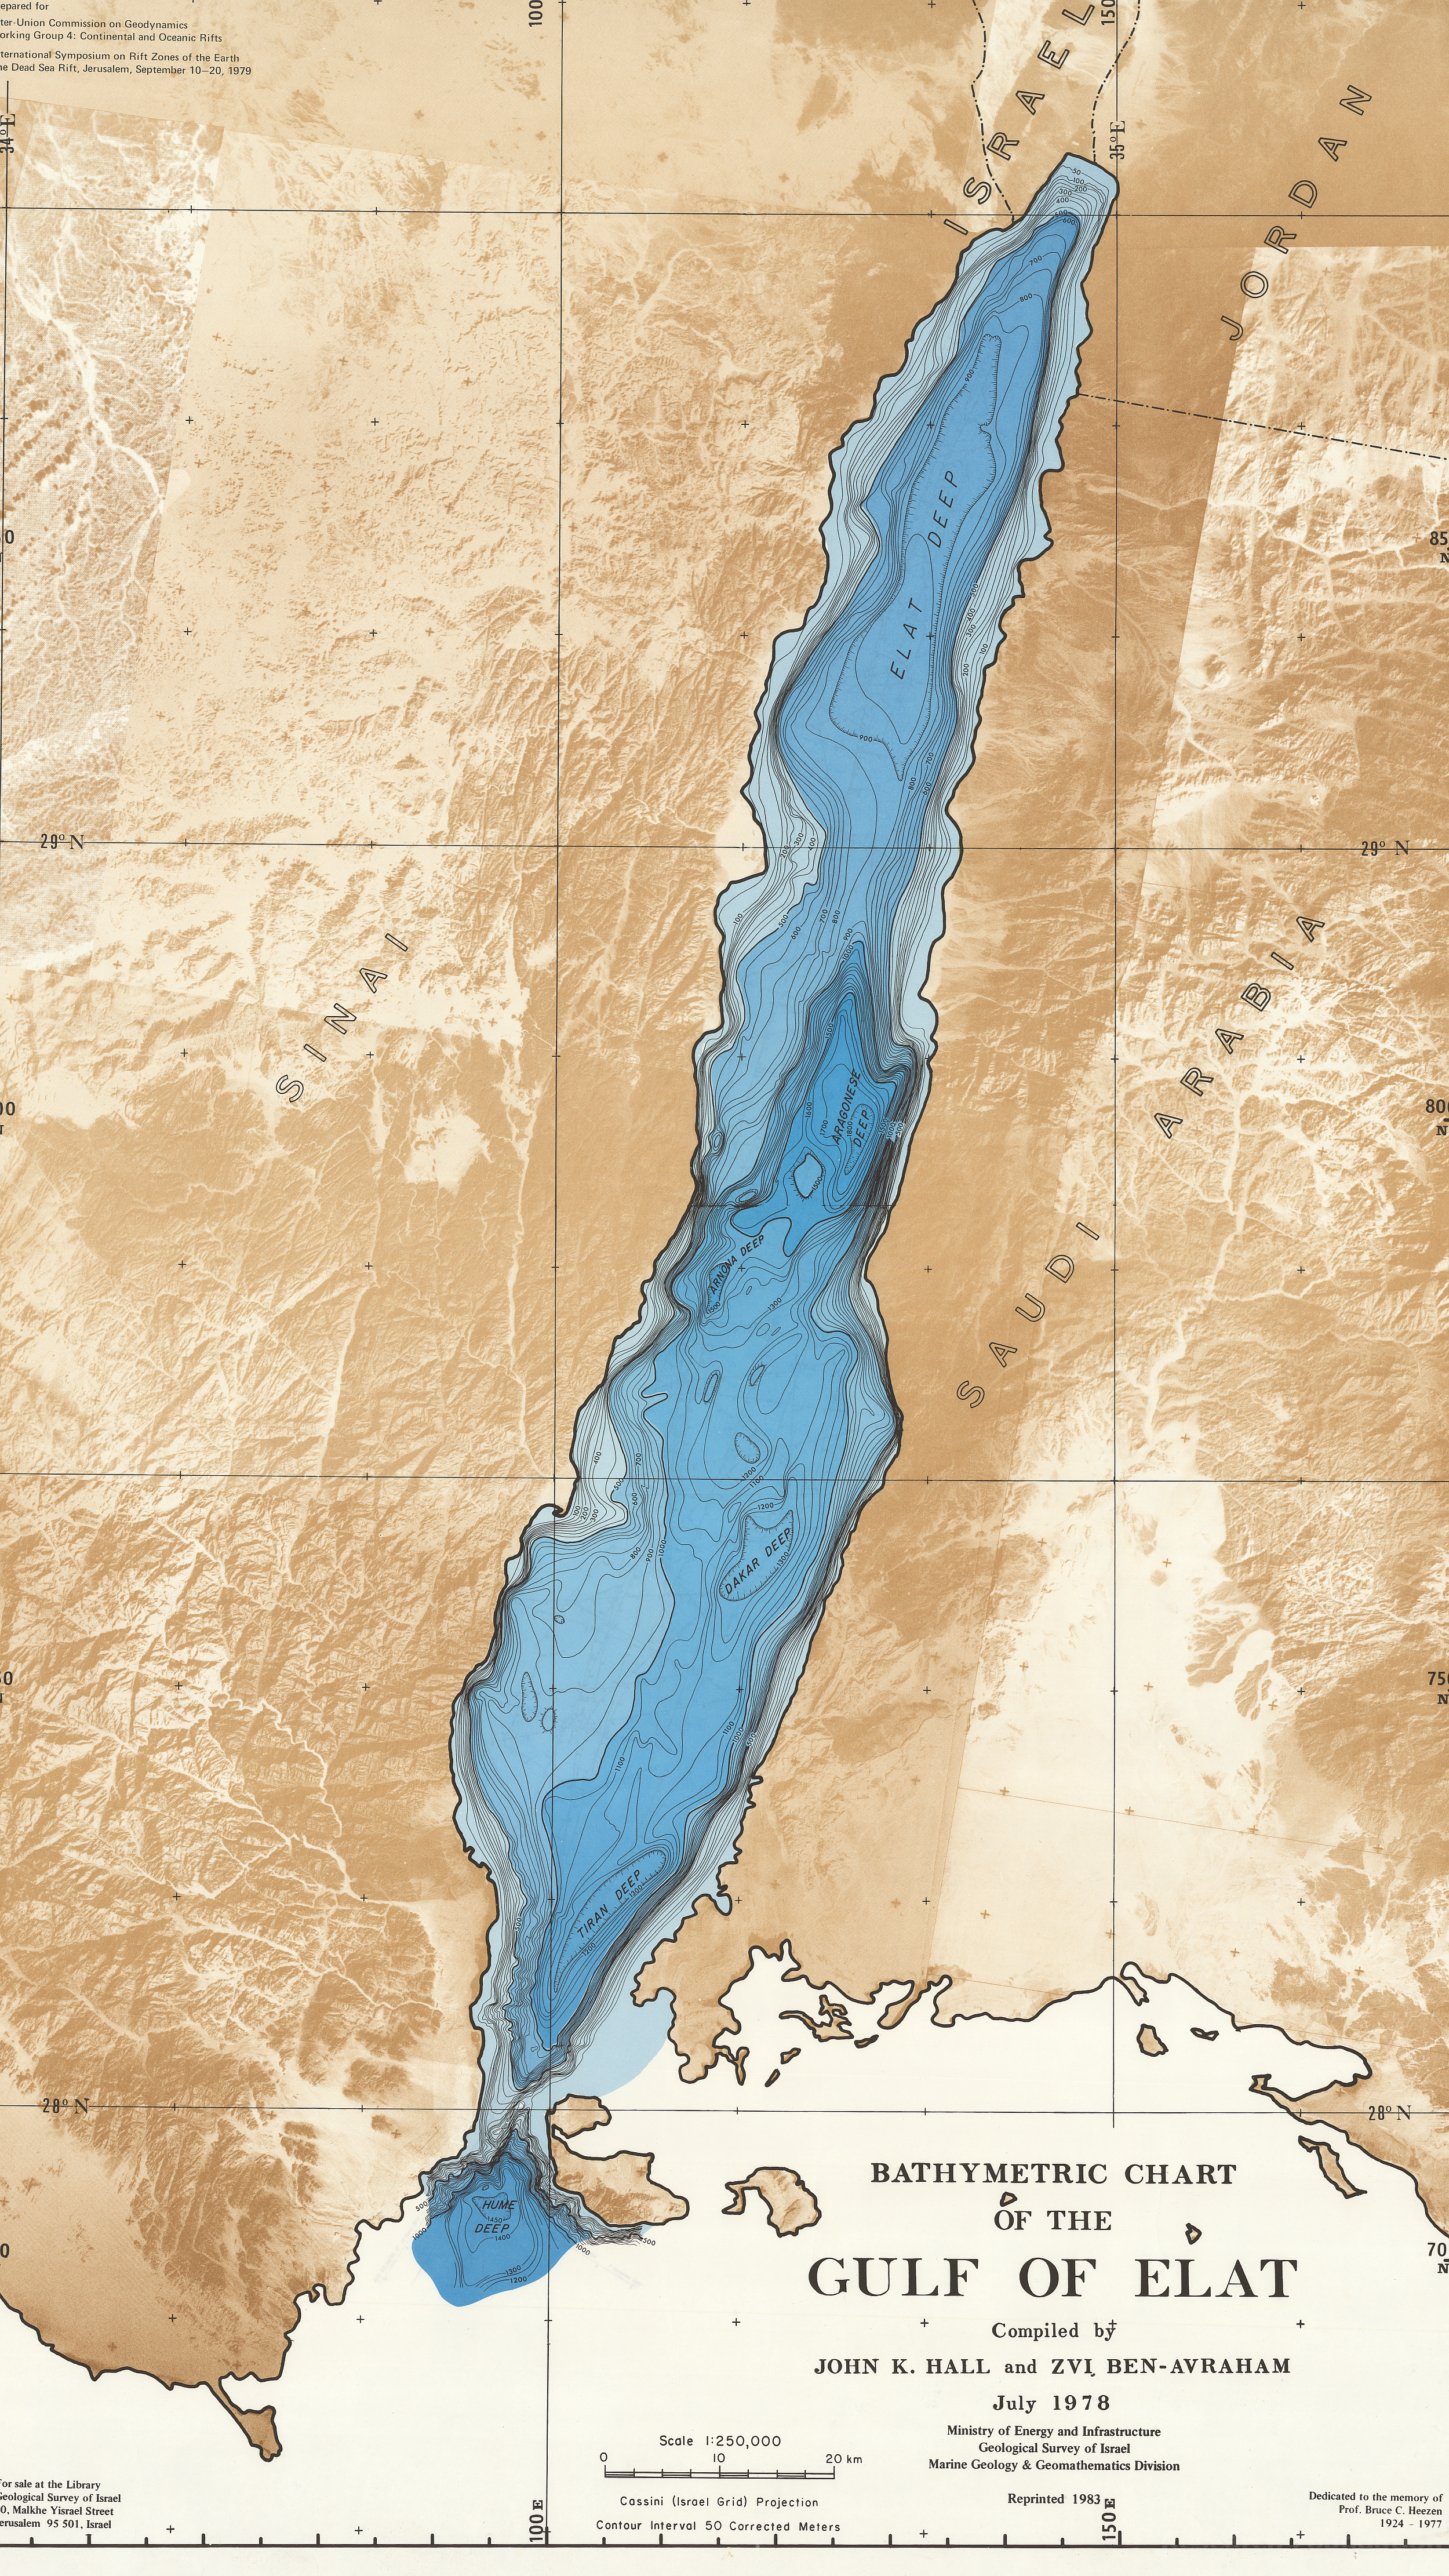 Israel Geological Survey Gulf of Aqaba, where the Israelites may have crossed the Red Sea.